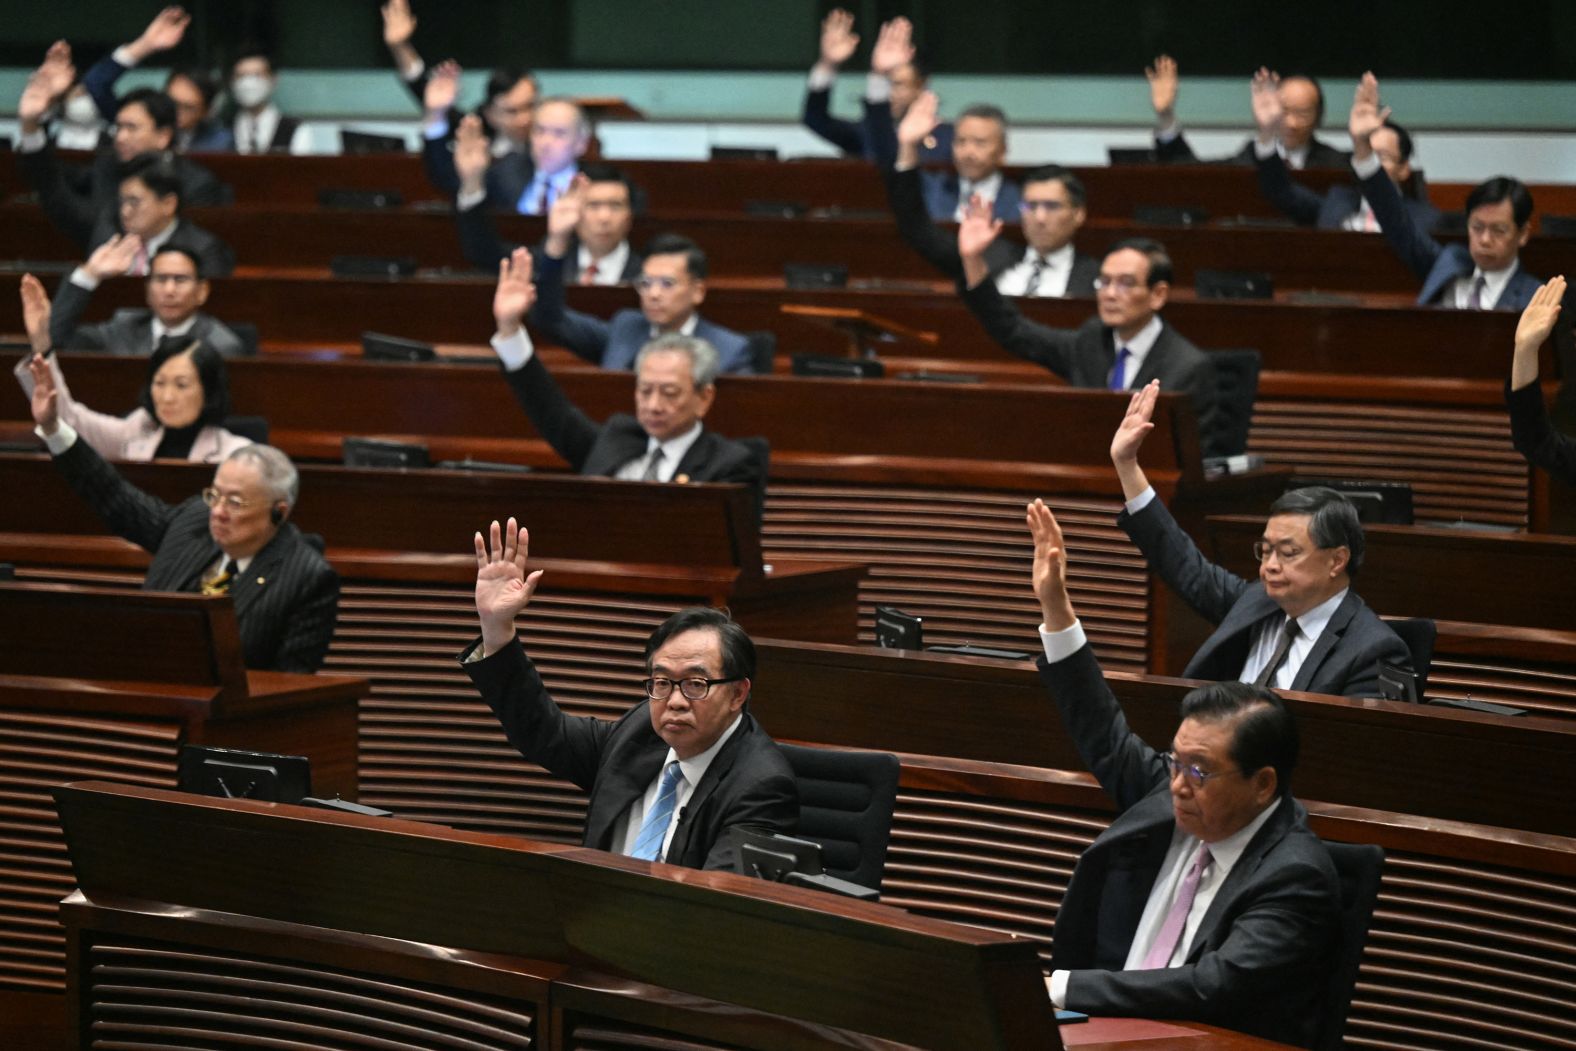 <a href="https://www.cnn.com/2024/03/19/china/hong-kong-second-national-security-law-passed-intl-hnk/index.html" target="_blank">Lawmakers vote for Article 23</a> in the chamber of the Legislative Council in Hong Kong on Tuesday, March 19. Hong Kong's legislature unanimously passed the bill, which critics and analysts warned would align the financial hub's national security laws more closely with those used on the Chinese mainland and deepen an ongoing crackdown on dissent.